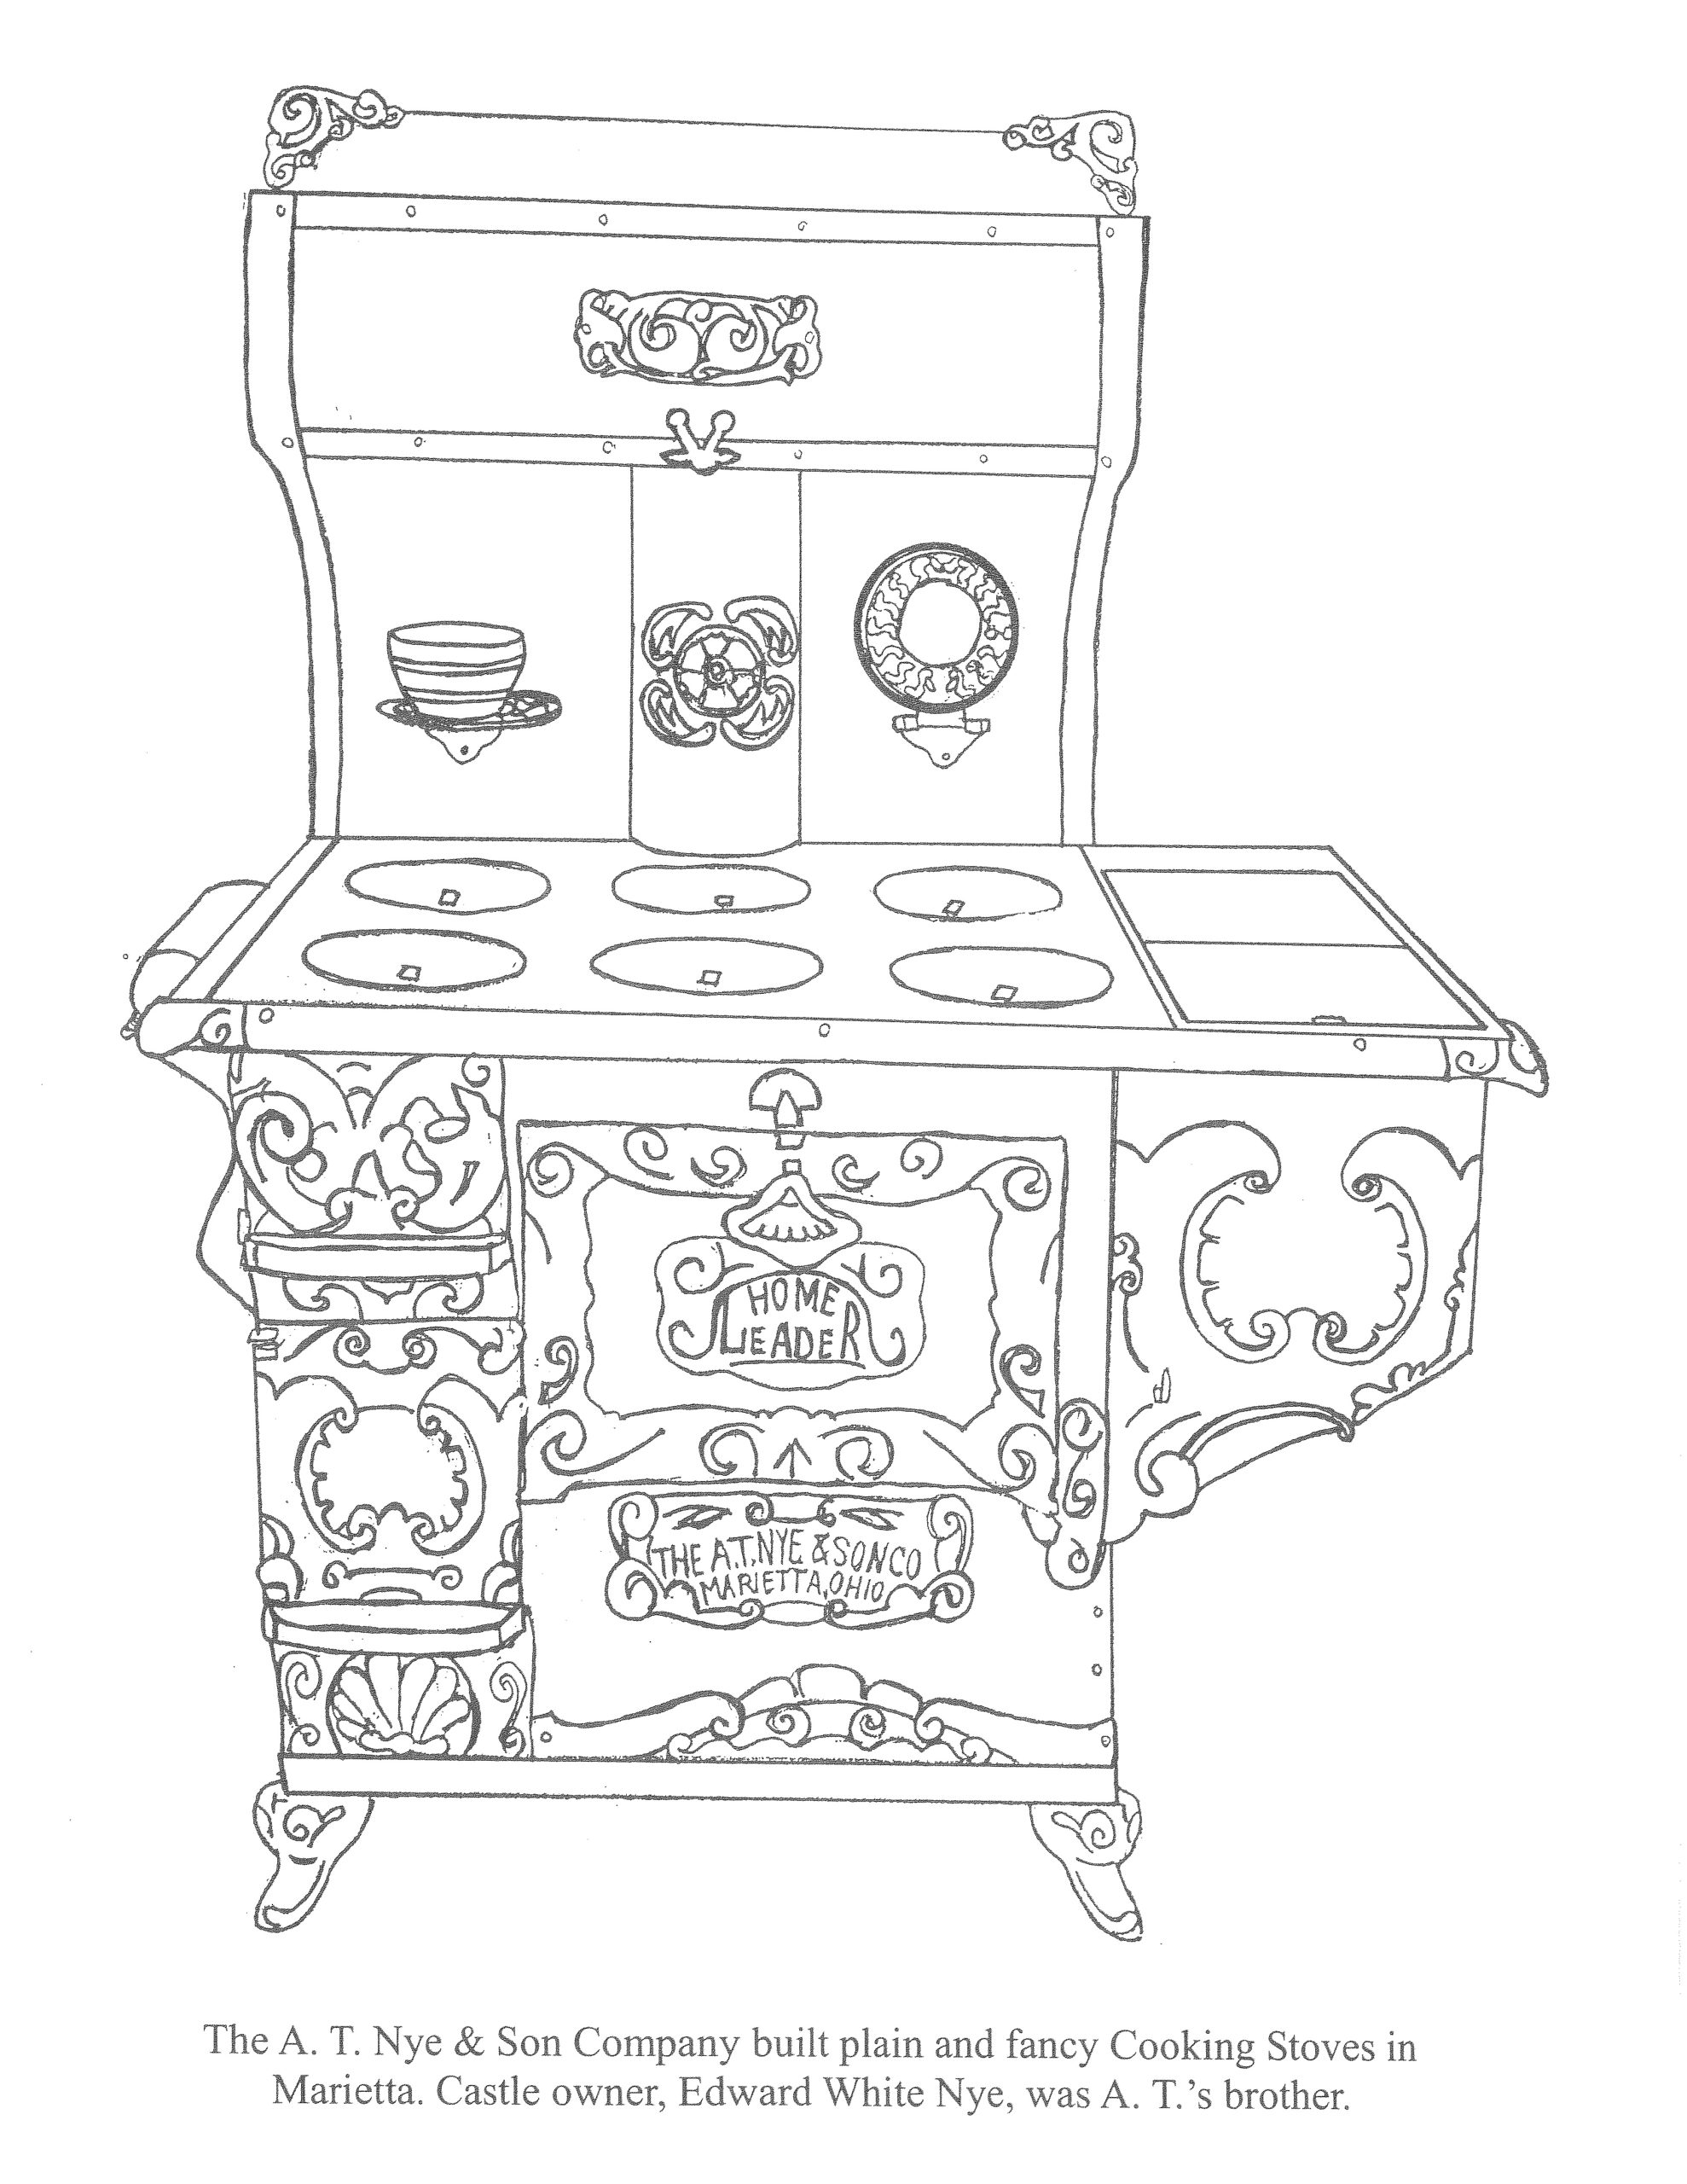 Nye Stove Coloring Page - The Castle